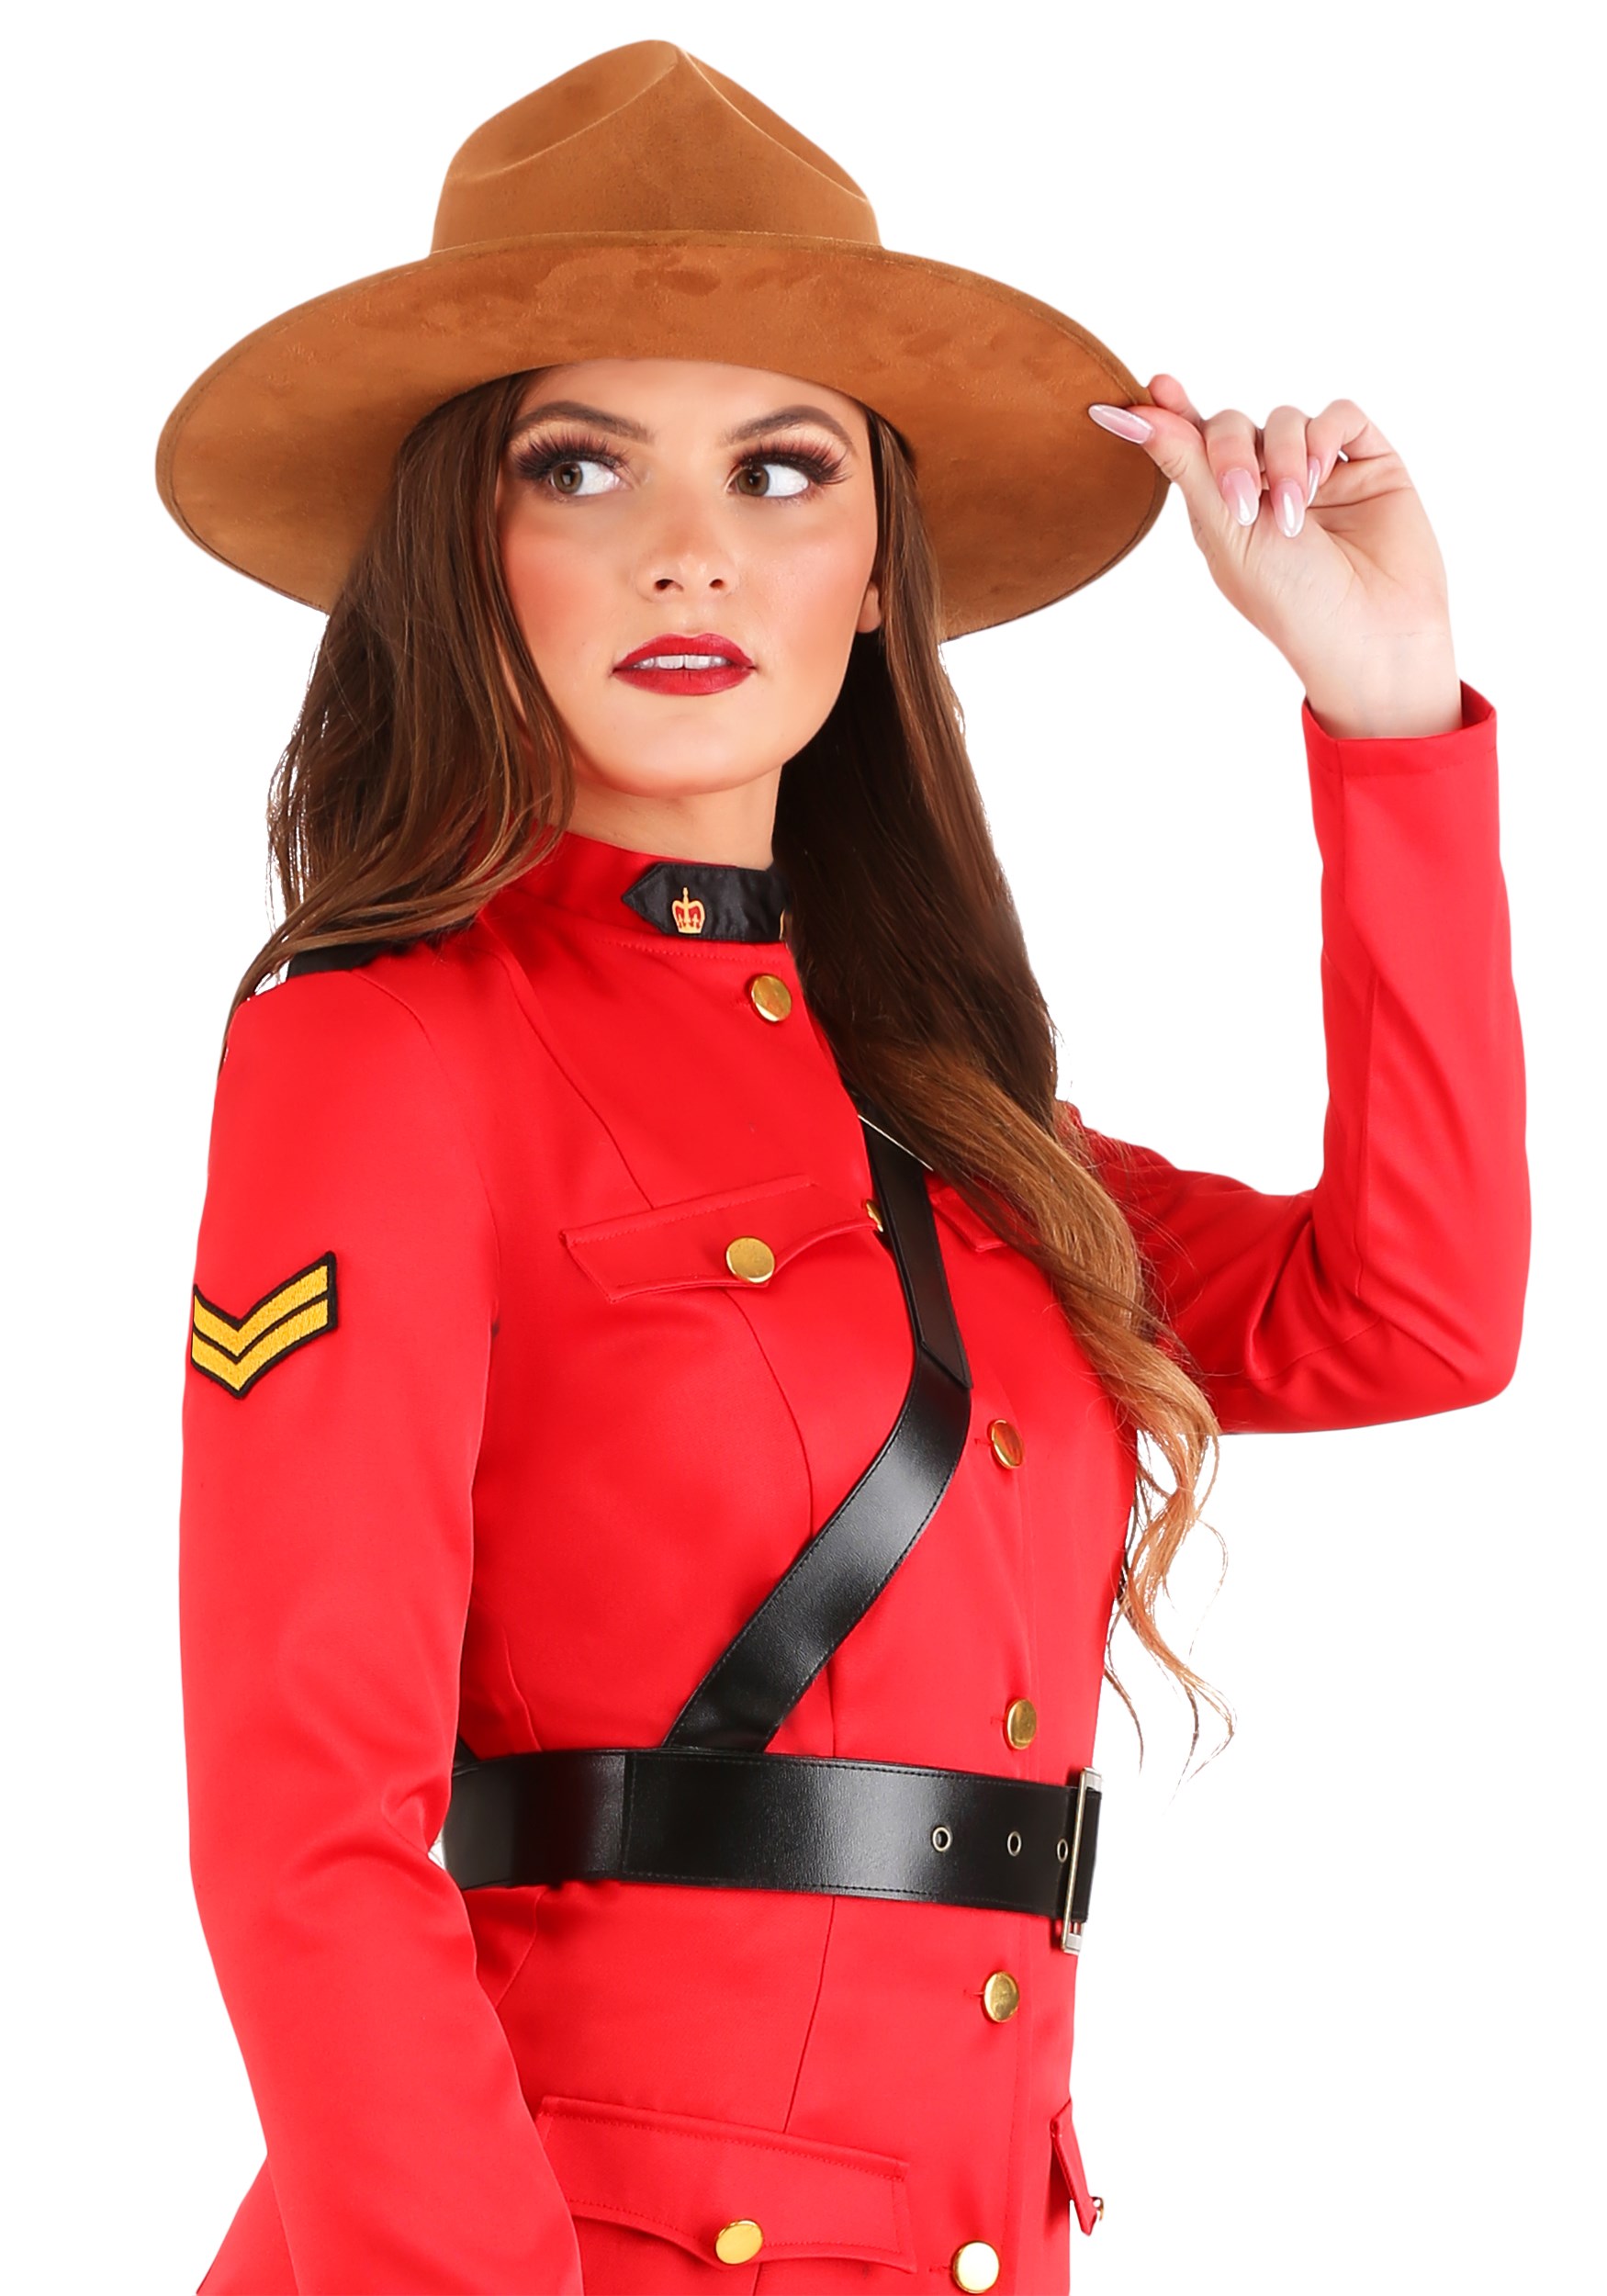 canadian mountie